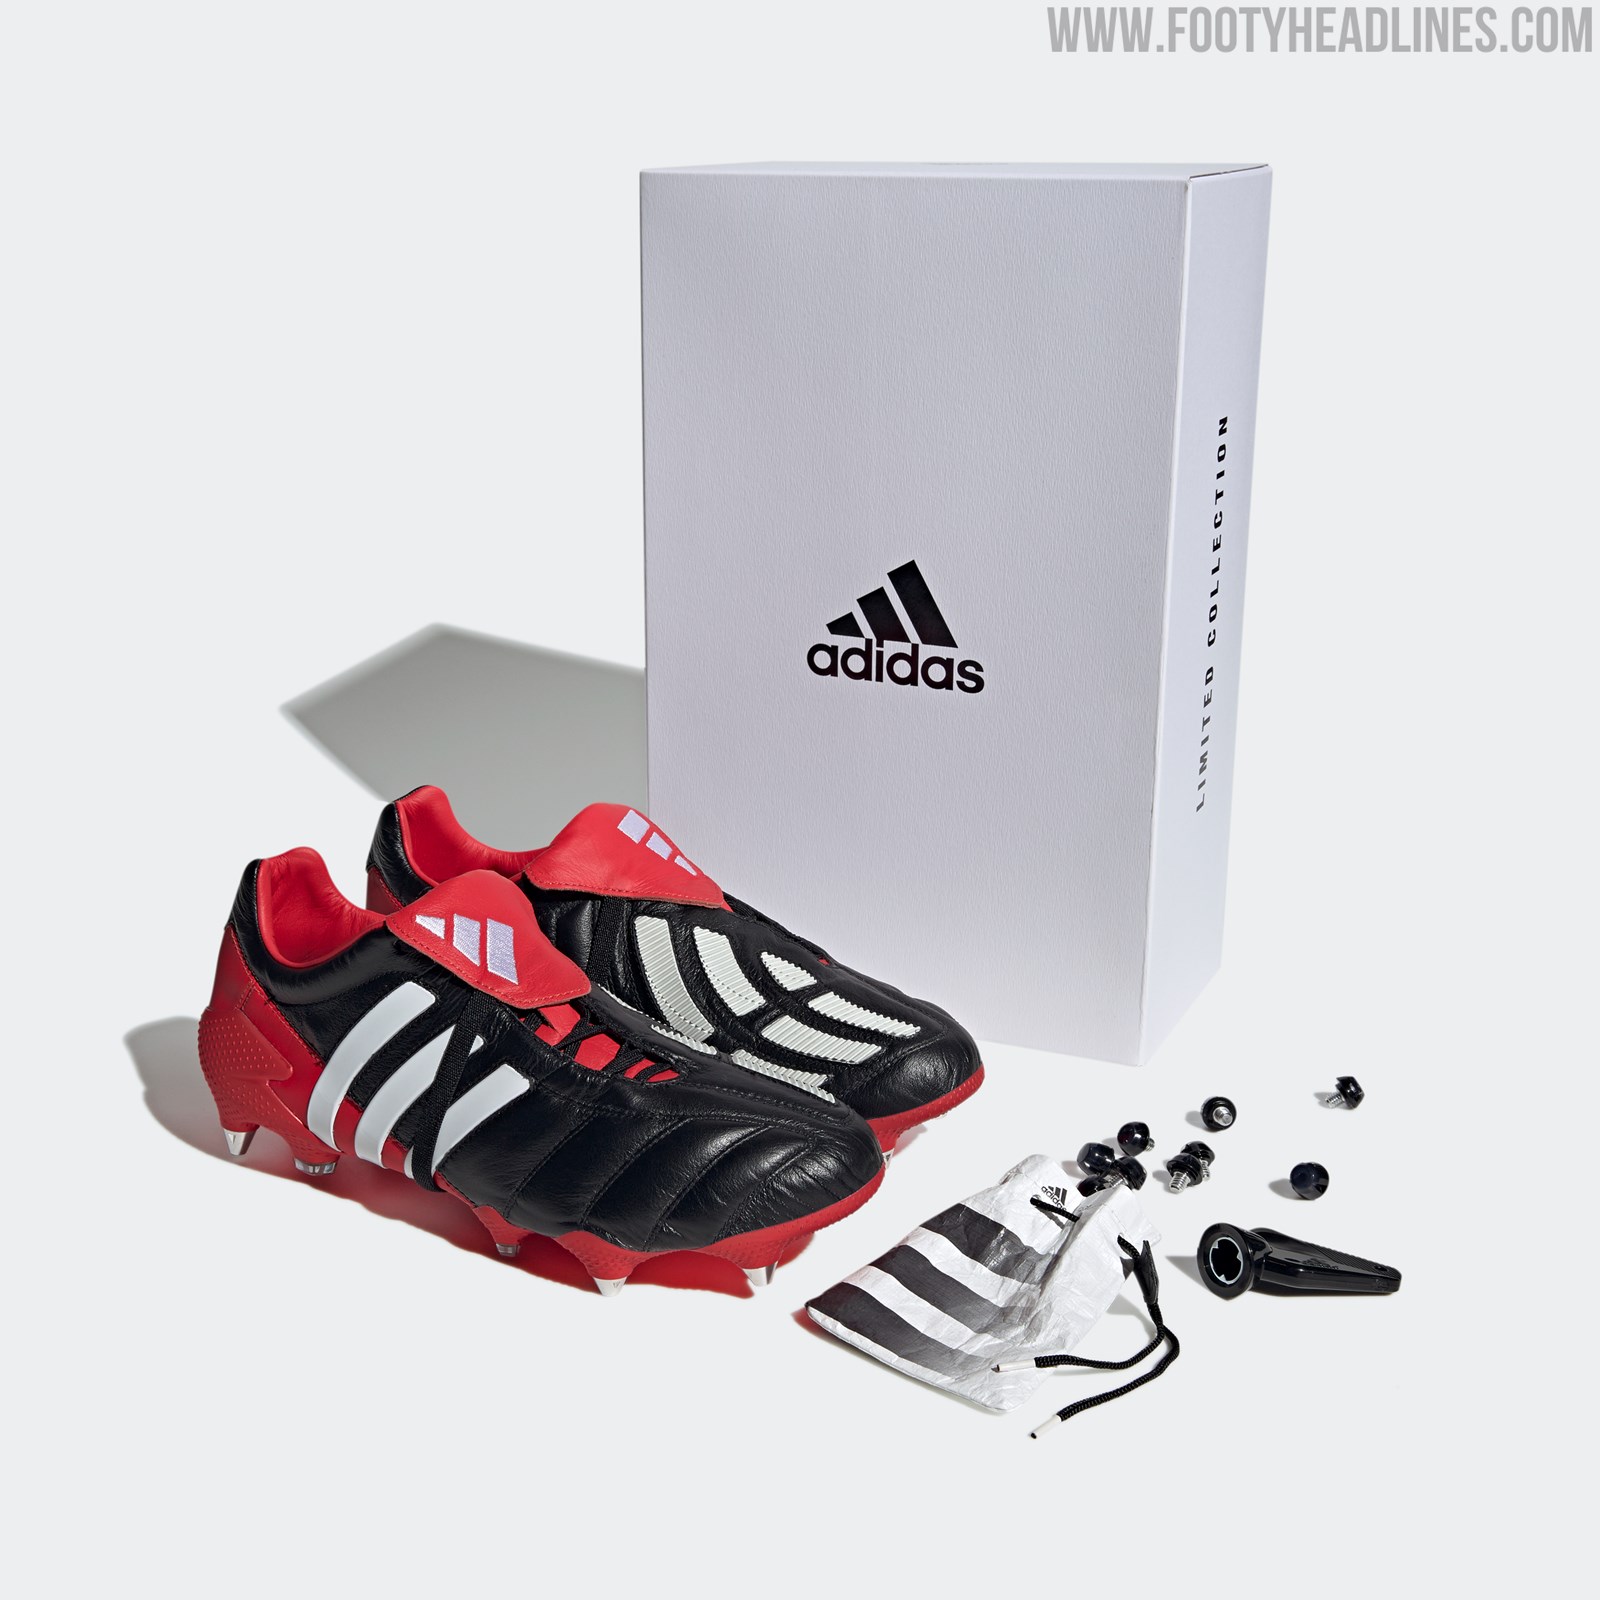 Adidas Predator Mania SG Remake Released - Just 2,002 Available - Footy Headlines